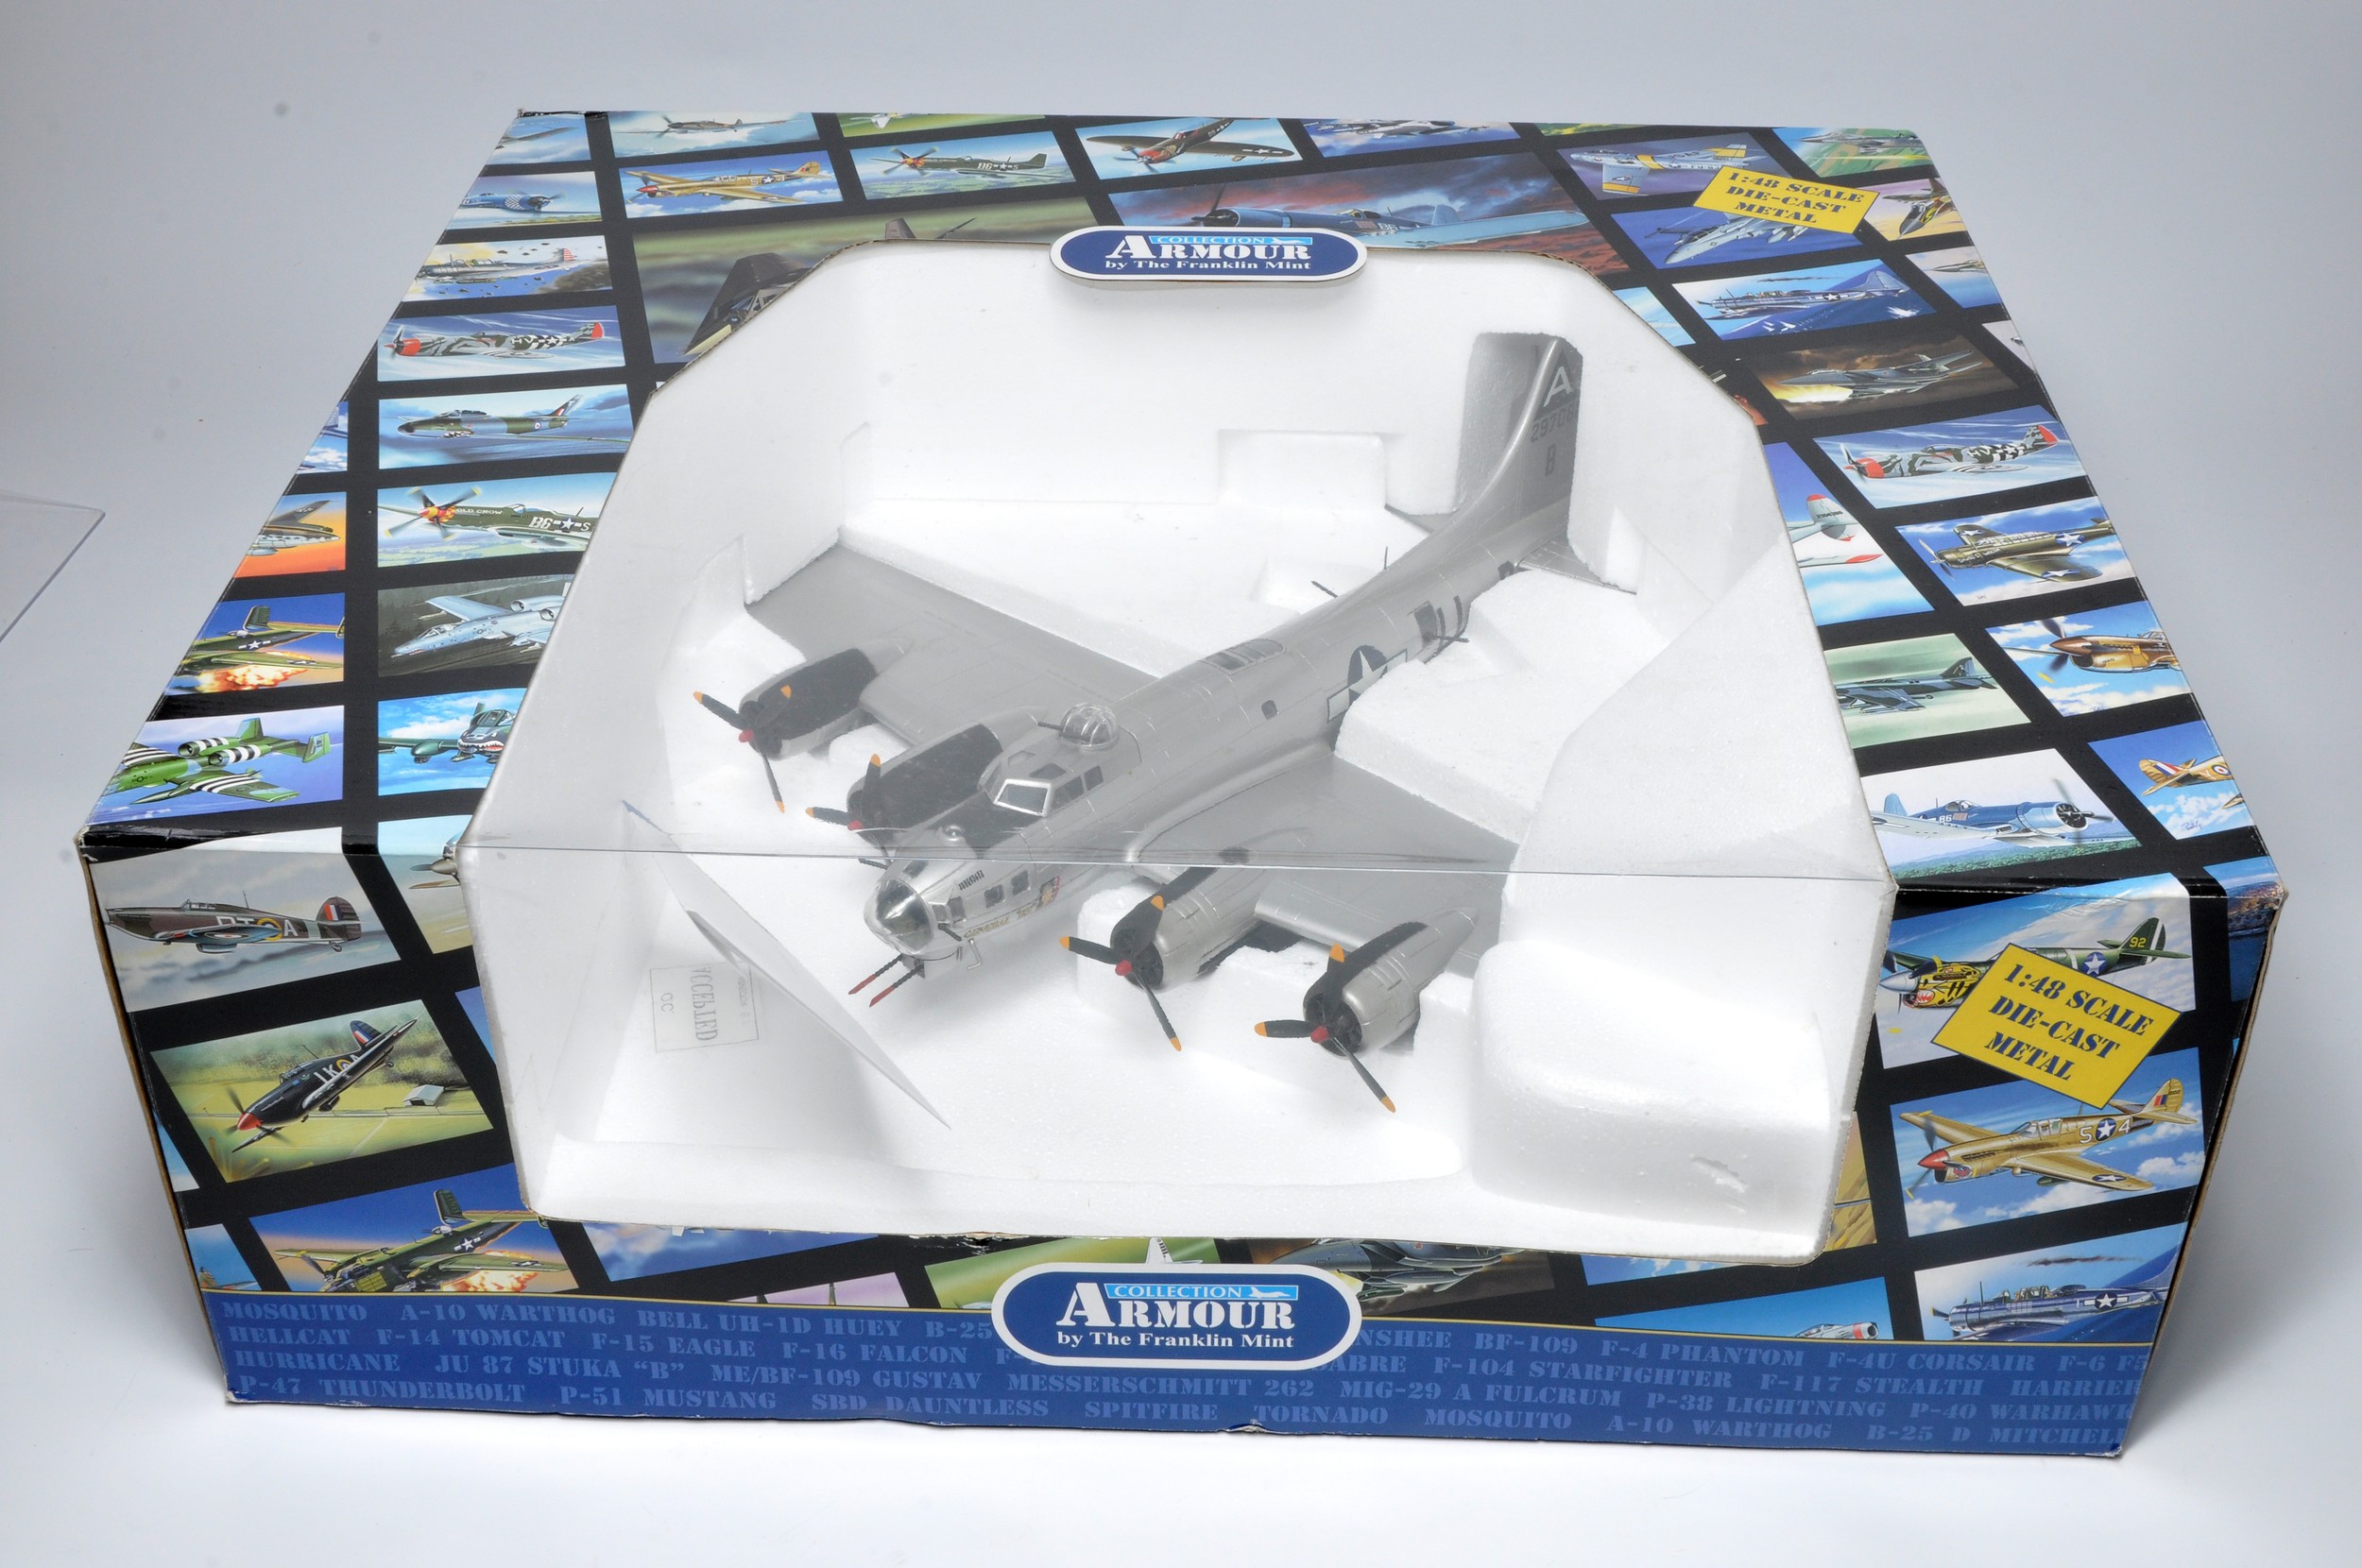 Franklin Mint 1/48 diecast model aircraft issue comprising No. B11E055 B17 Flying Fortress. Looks to